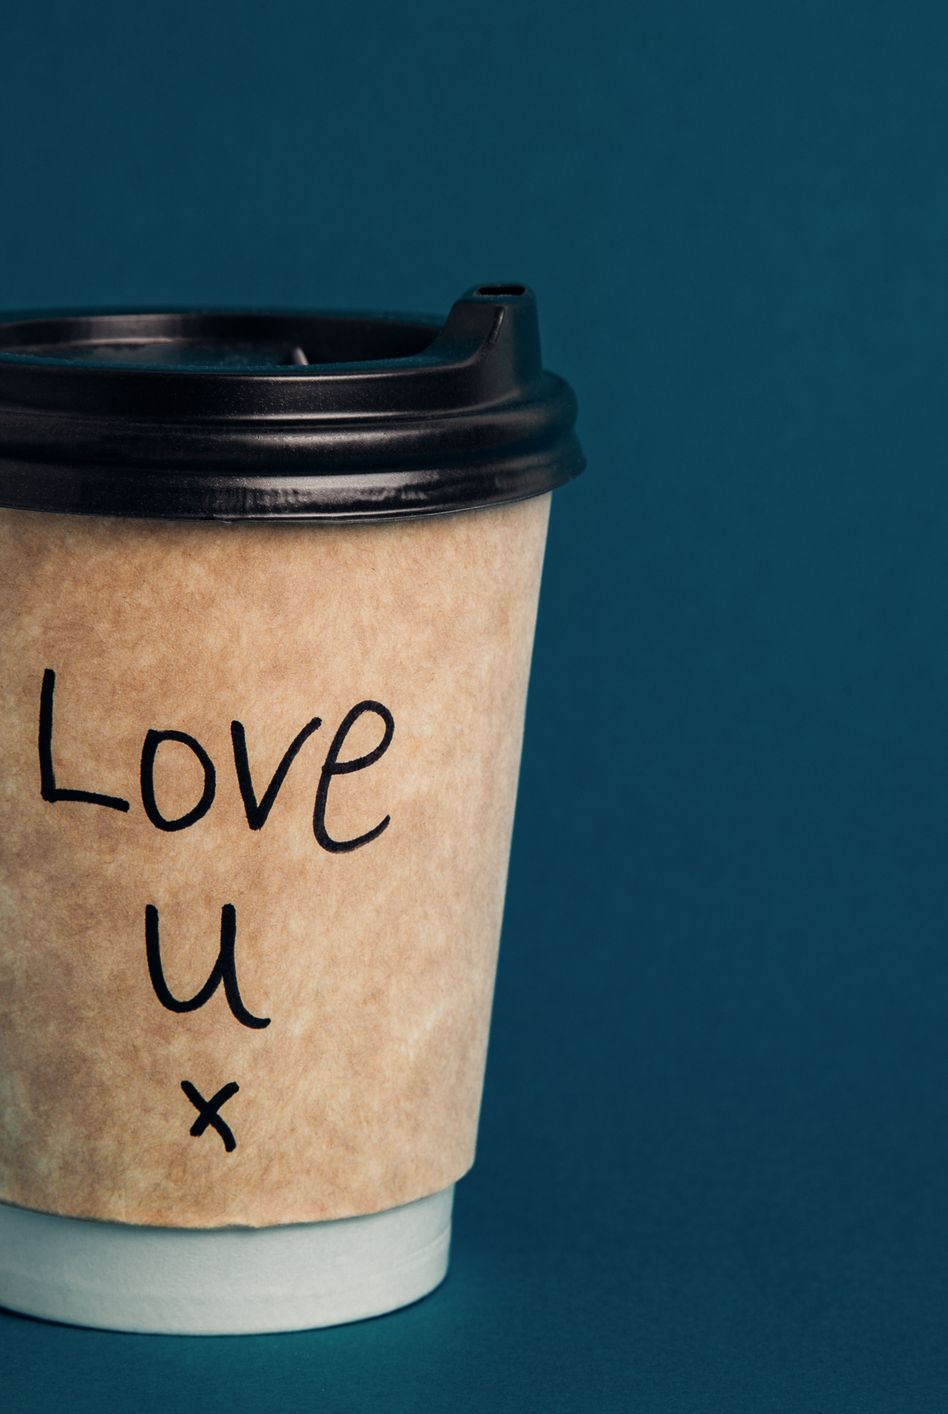 a message of love in a cup